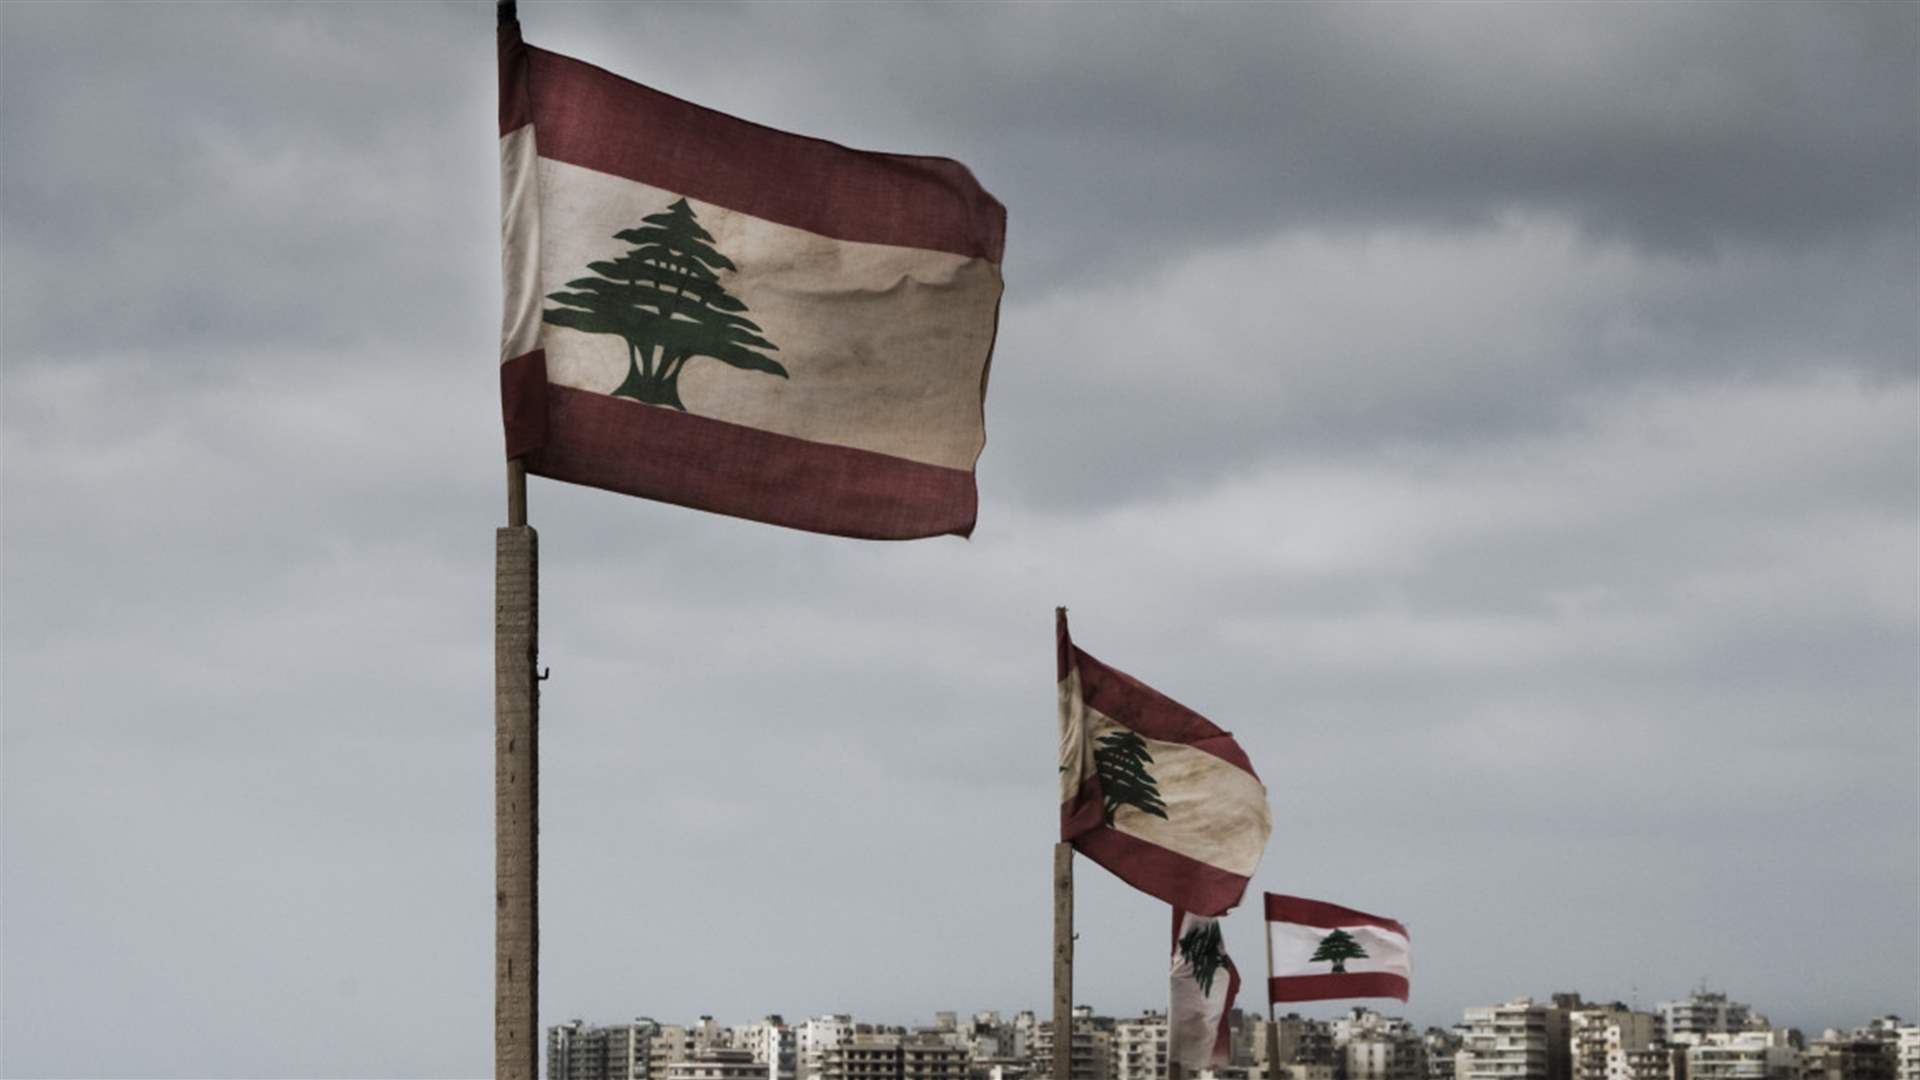 Le Drian&#39;s diplomatic endeavor and navigating BDL&#39;s governance crisis: The challenge for Lebanese leaders